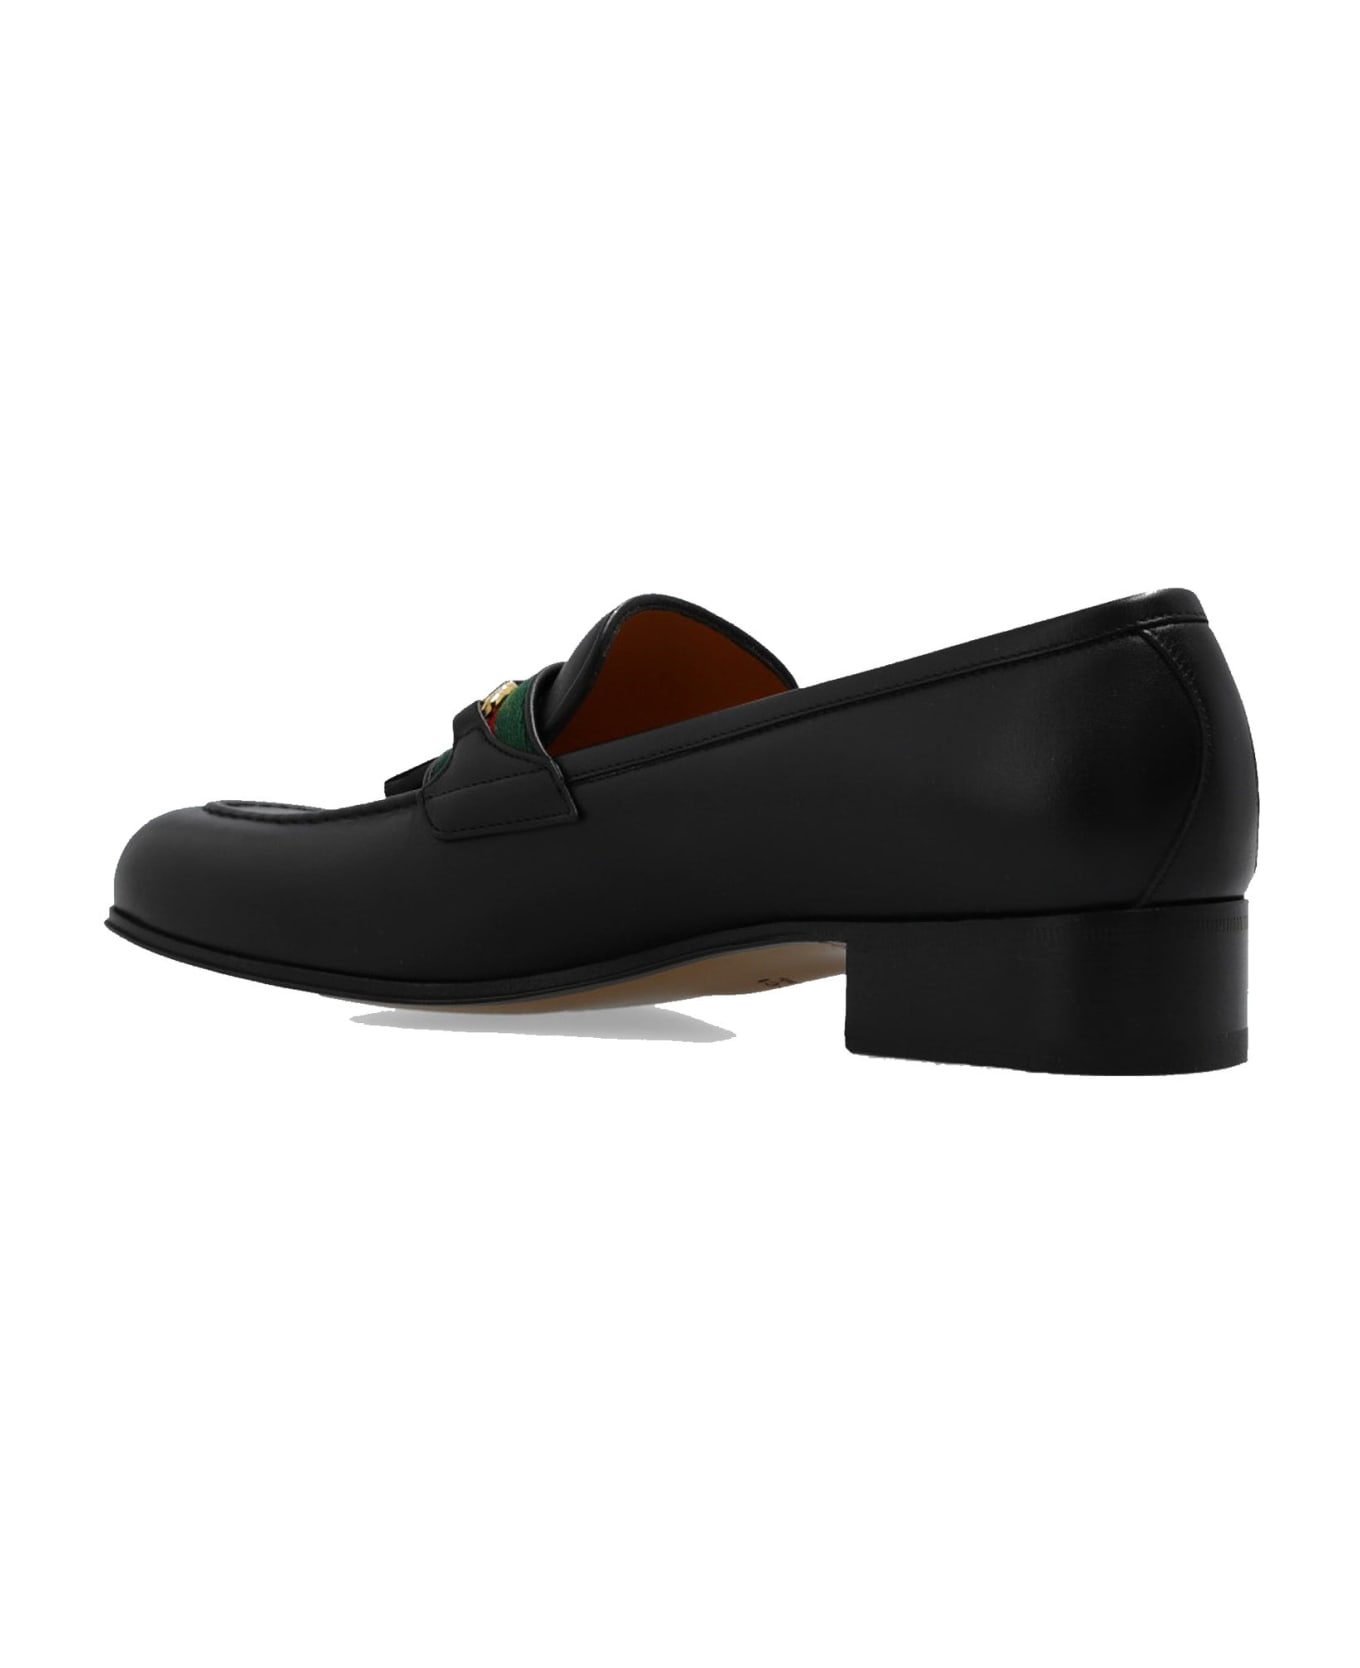 Gucci Leather Loafers - Black